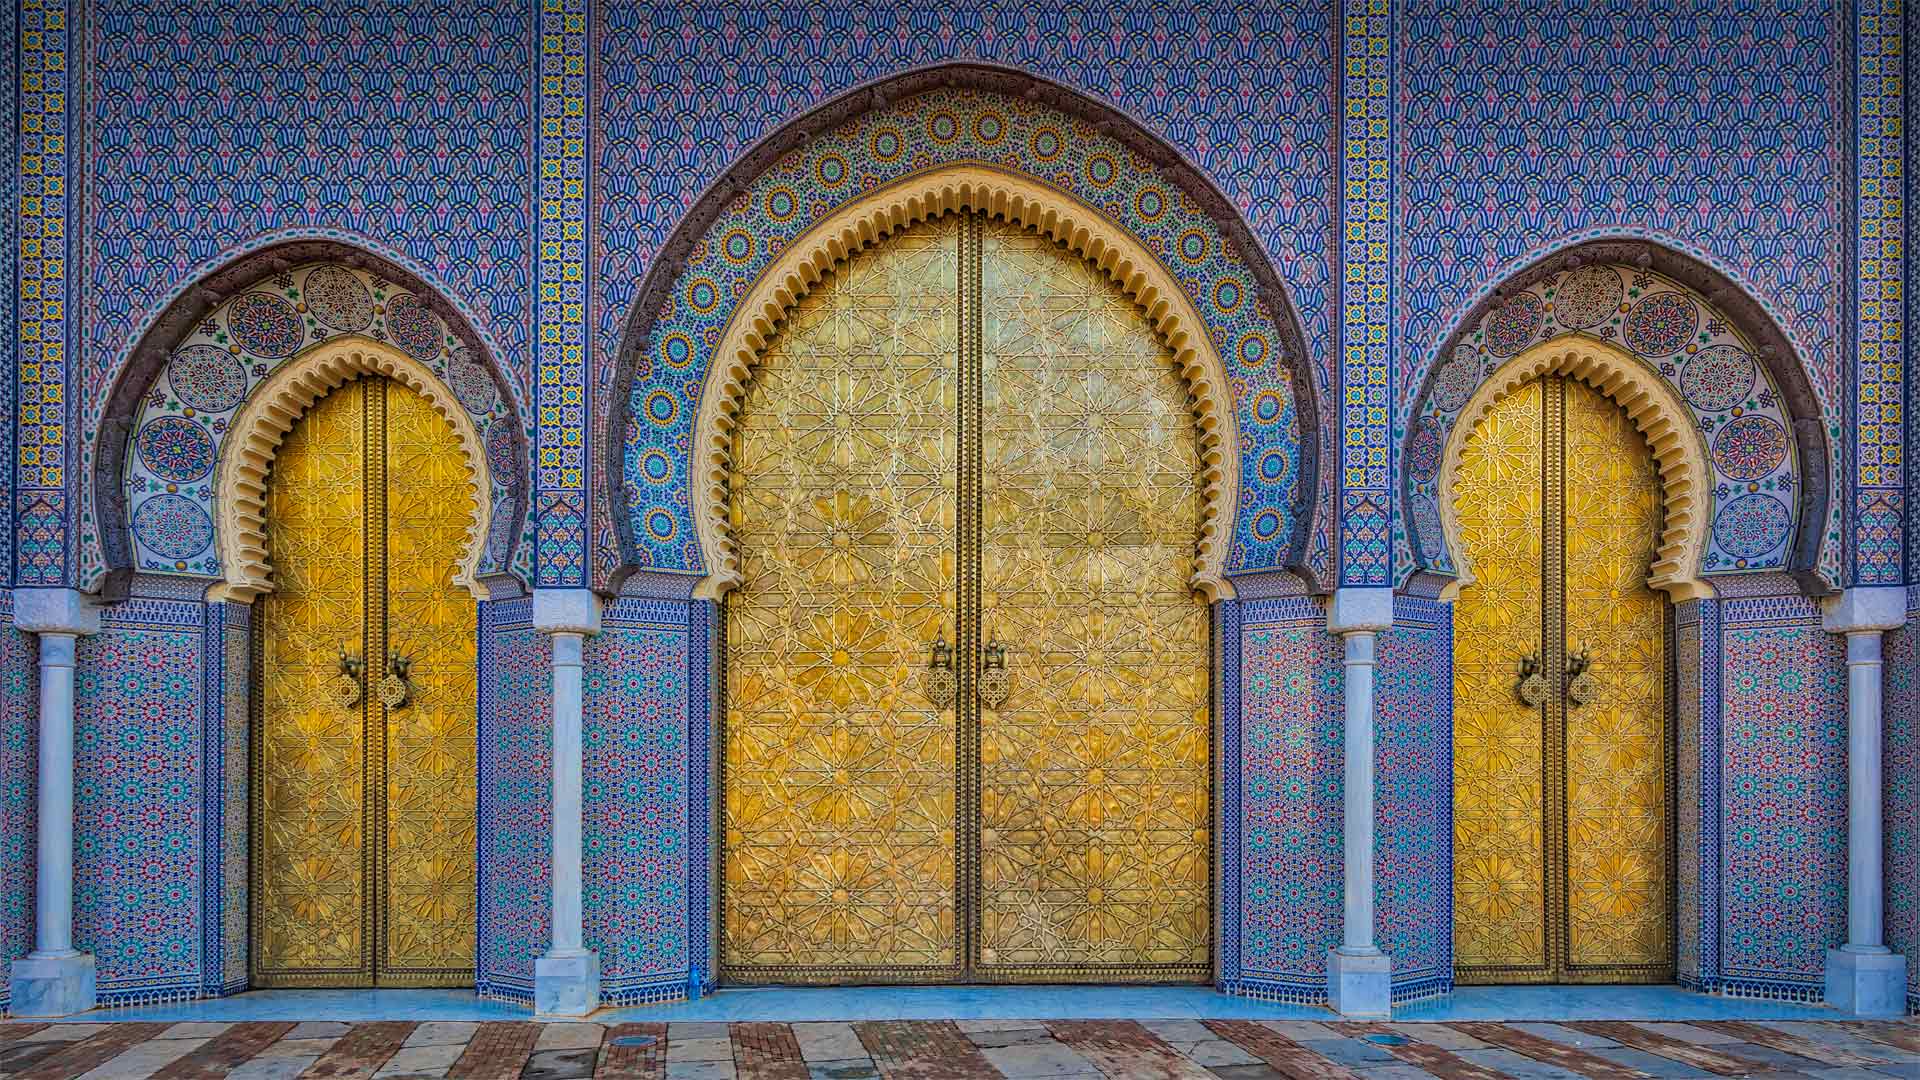 The gates of the Royal Palace (Dar al-Makhzen) in Fez, Morocco - Adam Smigielski/Getty Images)